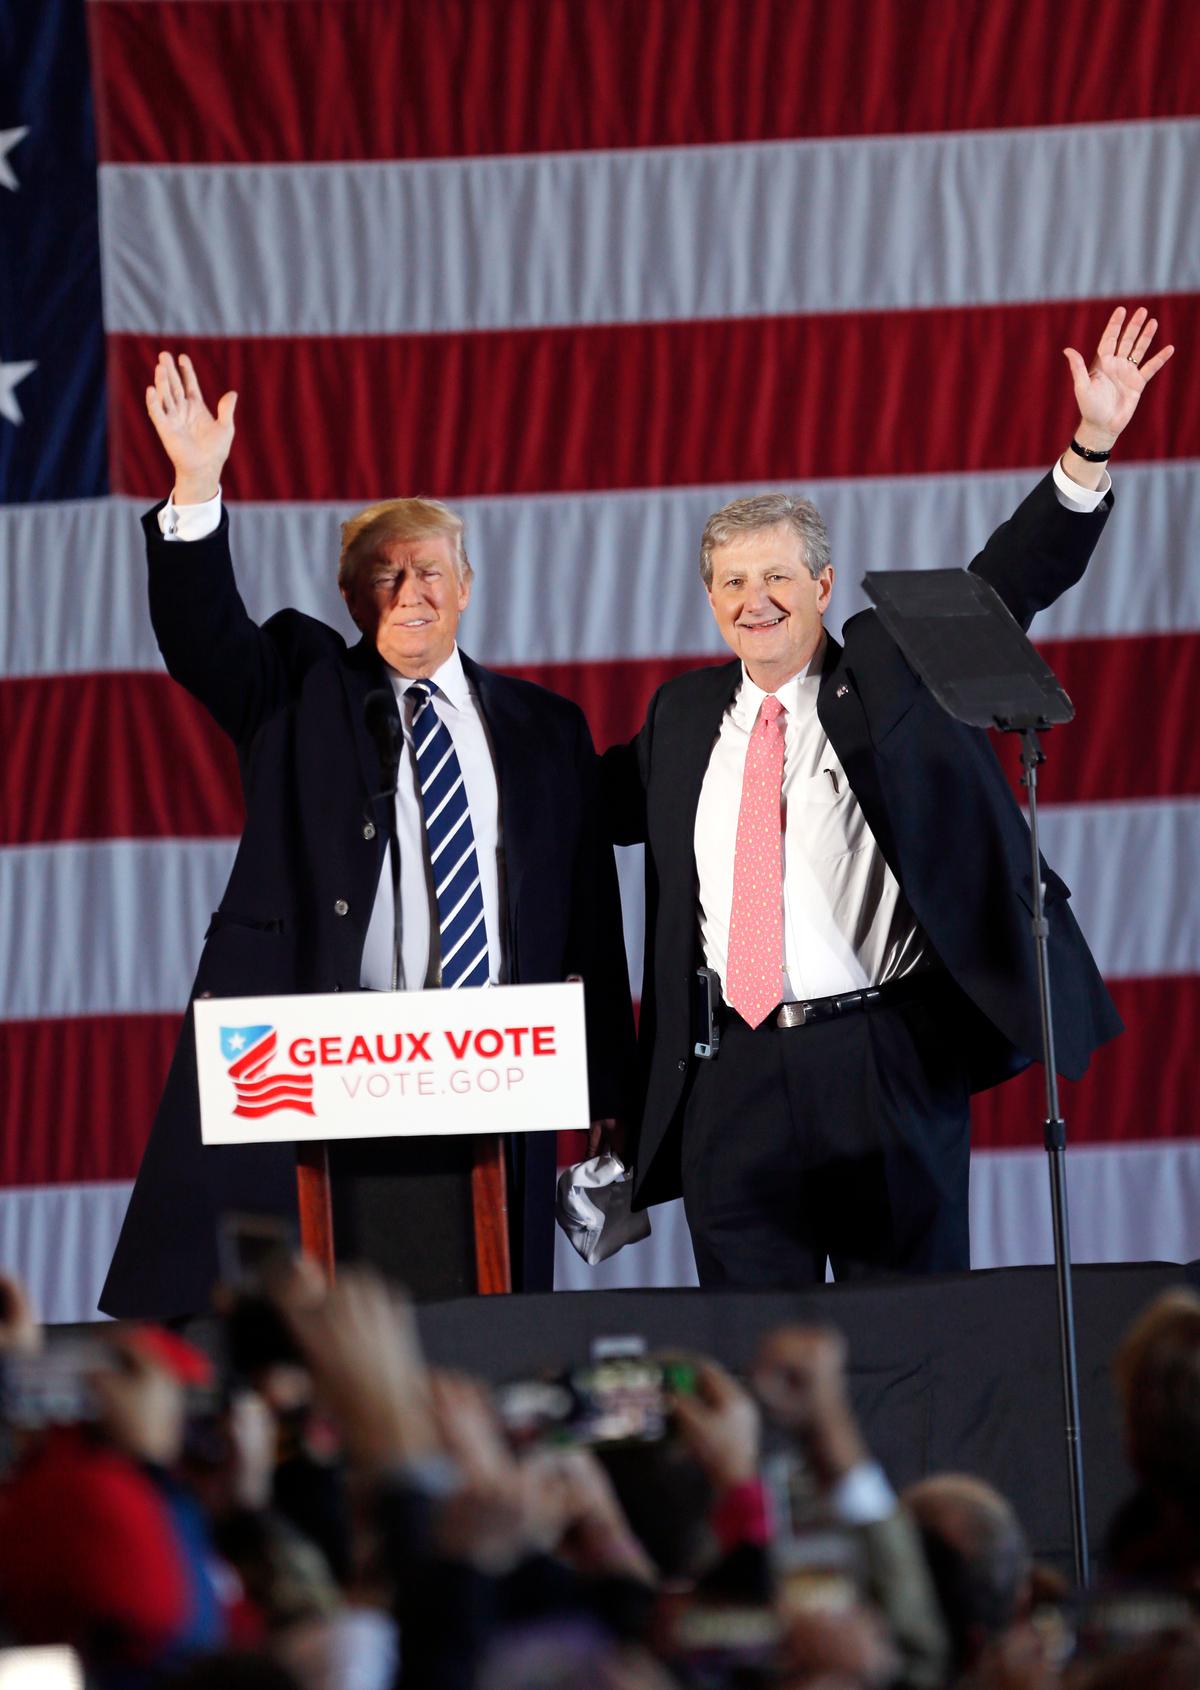 President-elect Donald Trump arrives onstage with Republican senate candidate, Louisiana Treasurer John Kennedy, to speak at a "Get Out The Vote" rally in Baton Rouge, La., on Dec. 9, 2016. (AP Photo/Gerald Herbert)